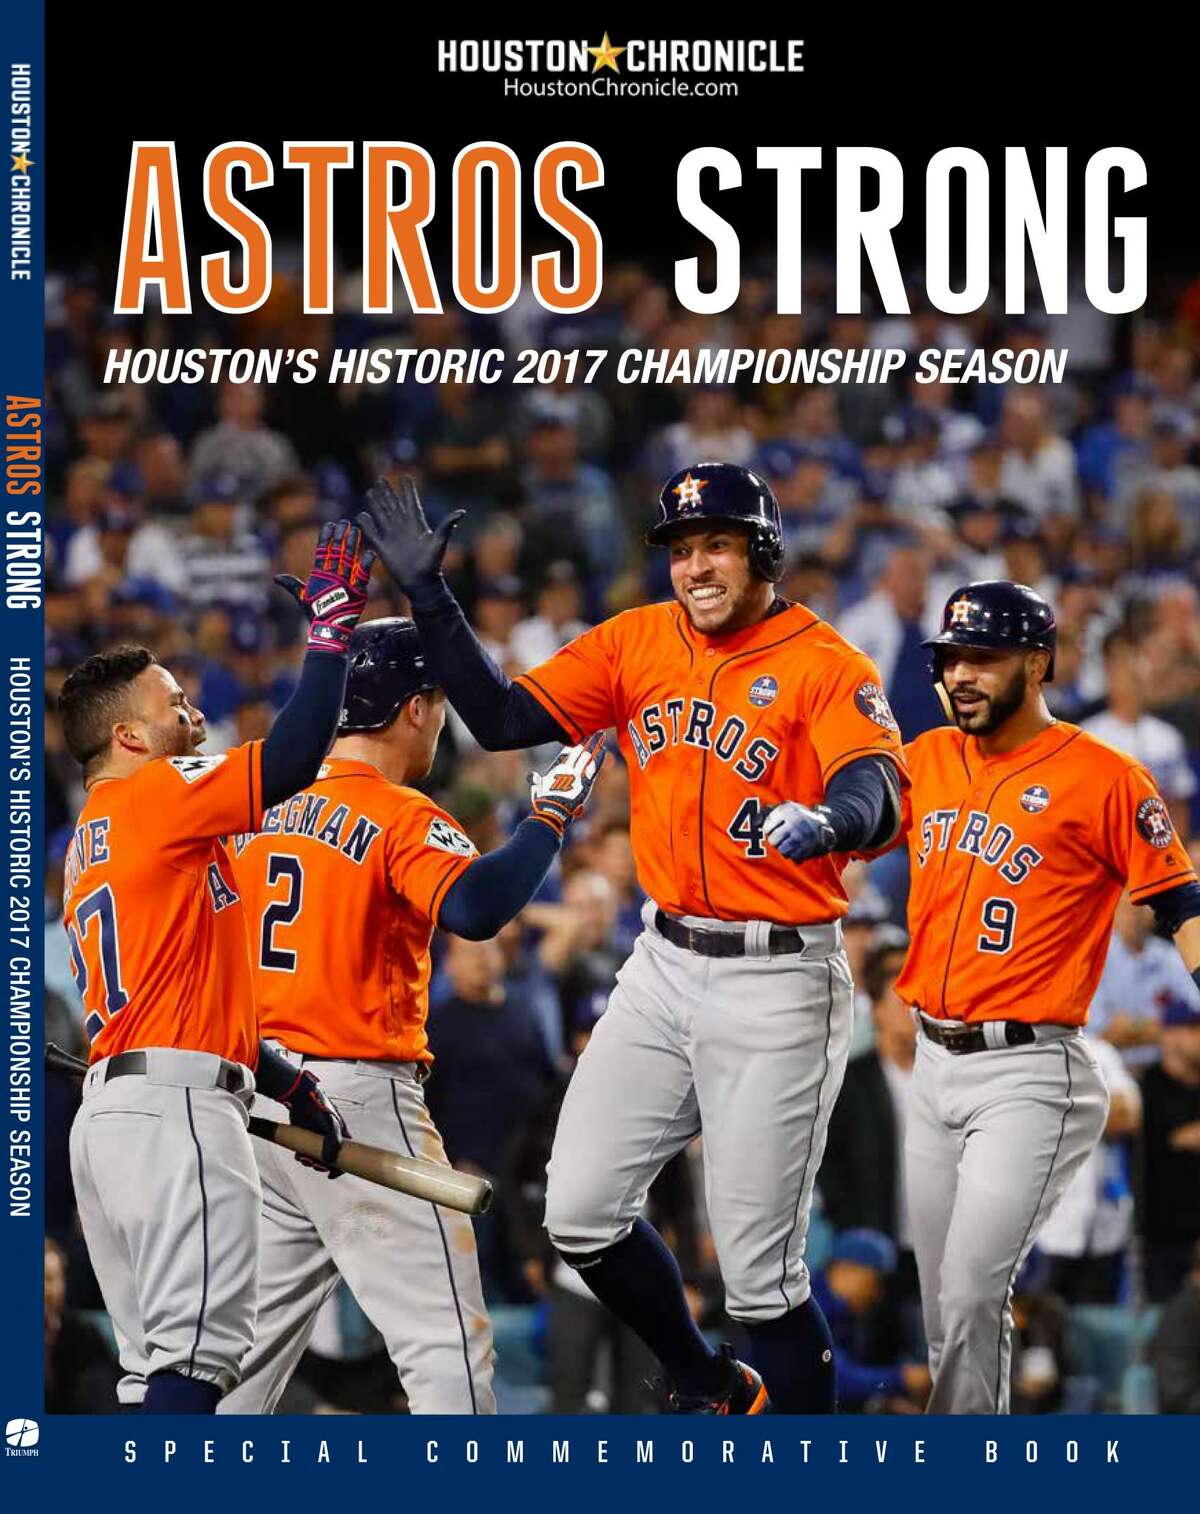 Astros Sports Illustrated commemorative covers: Buy them here